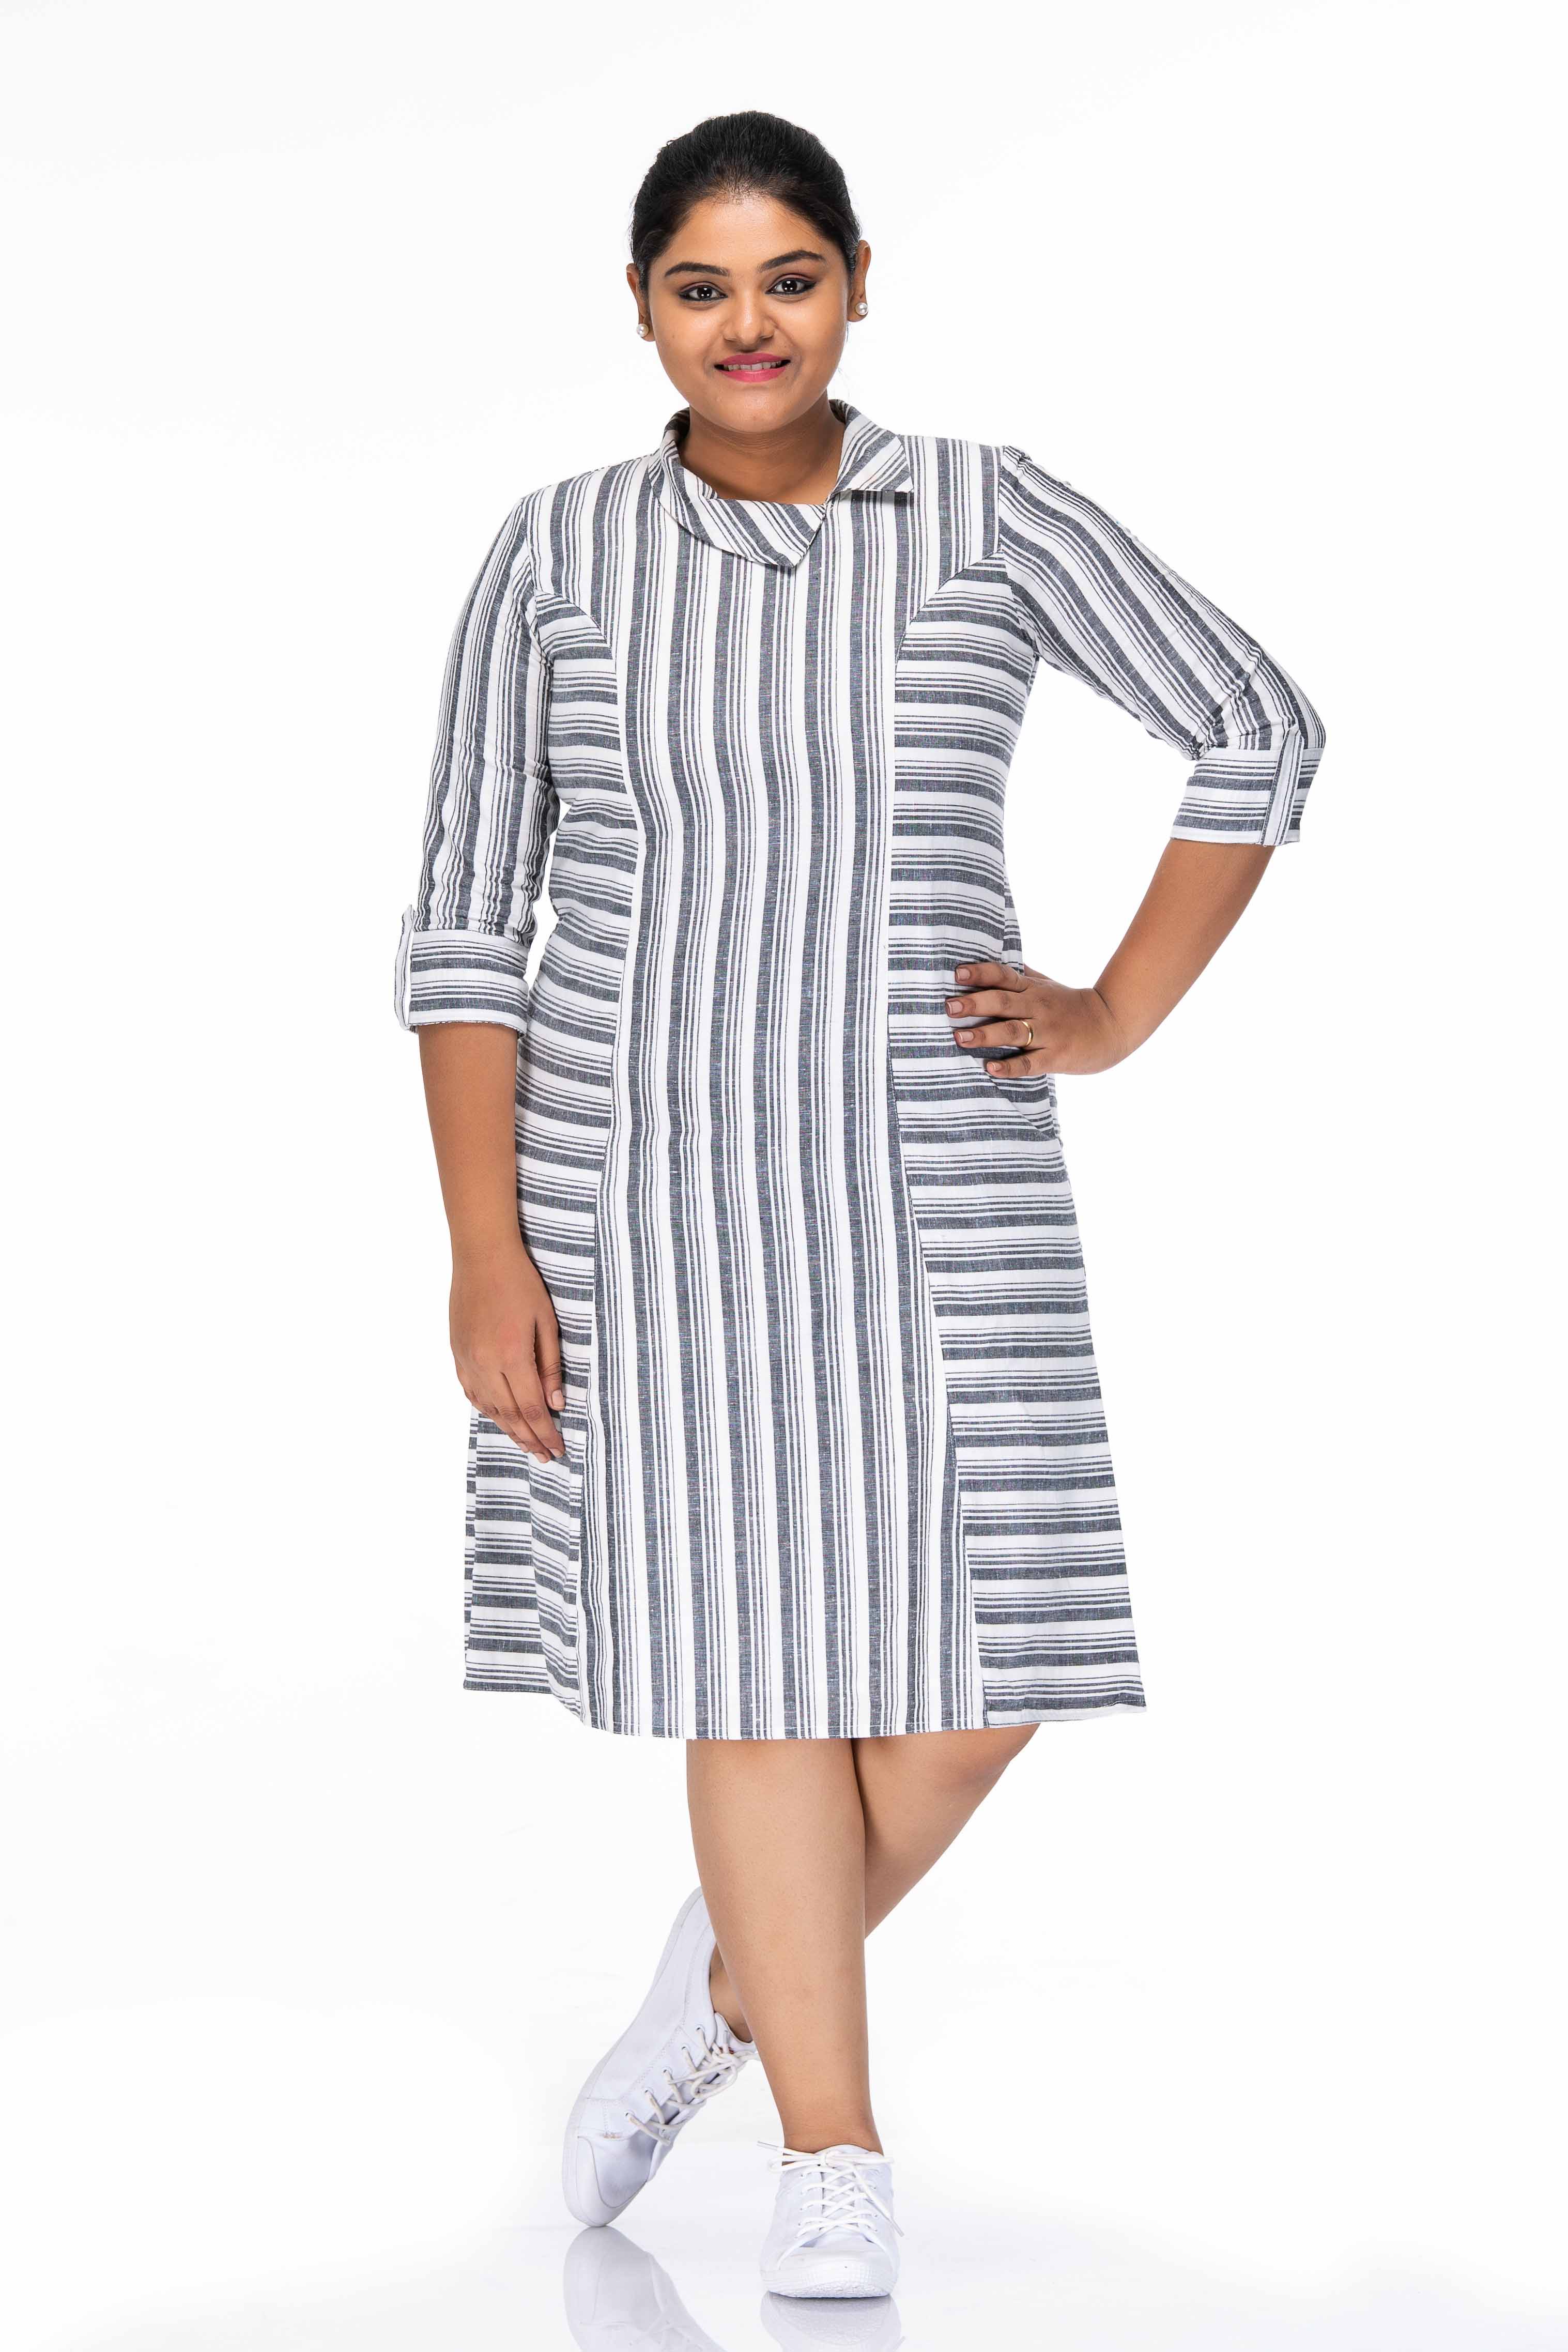 Black and White Checkered Cotton Shirt Dress for Women